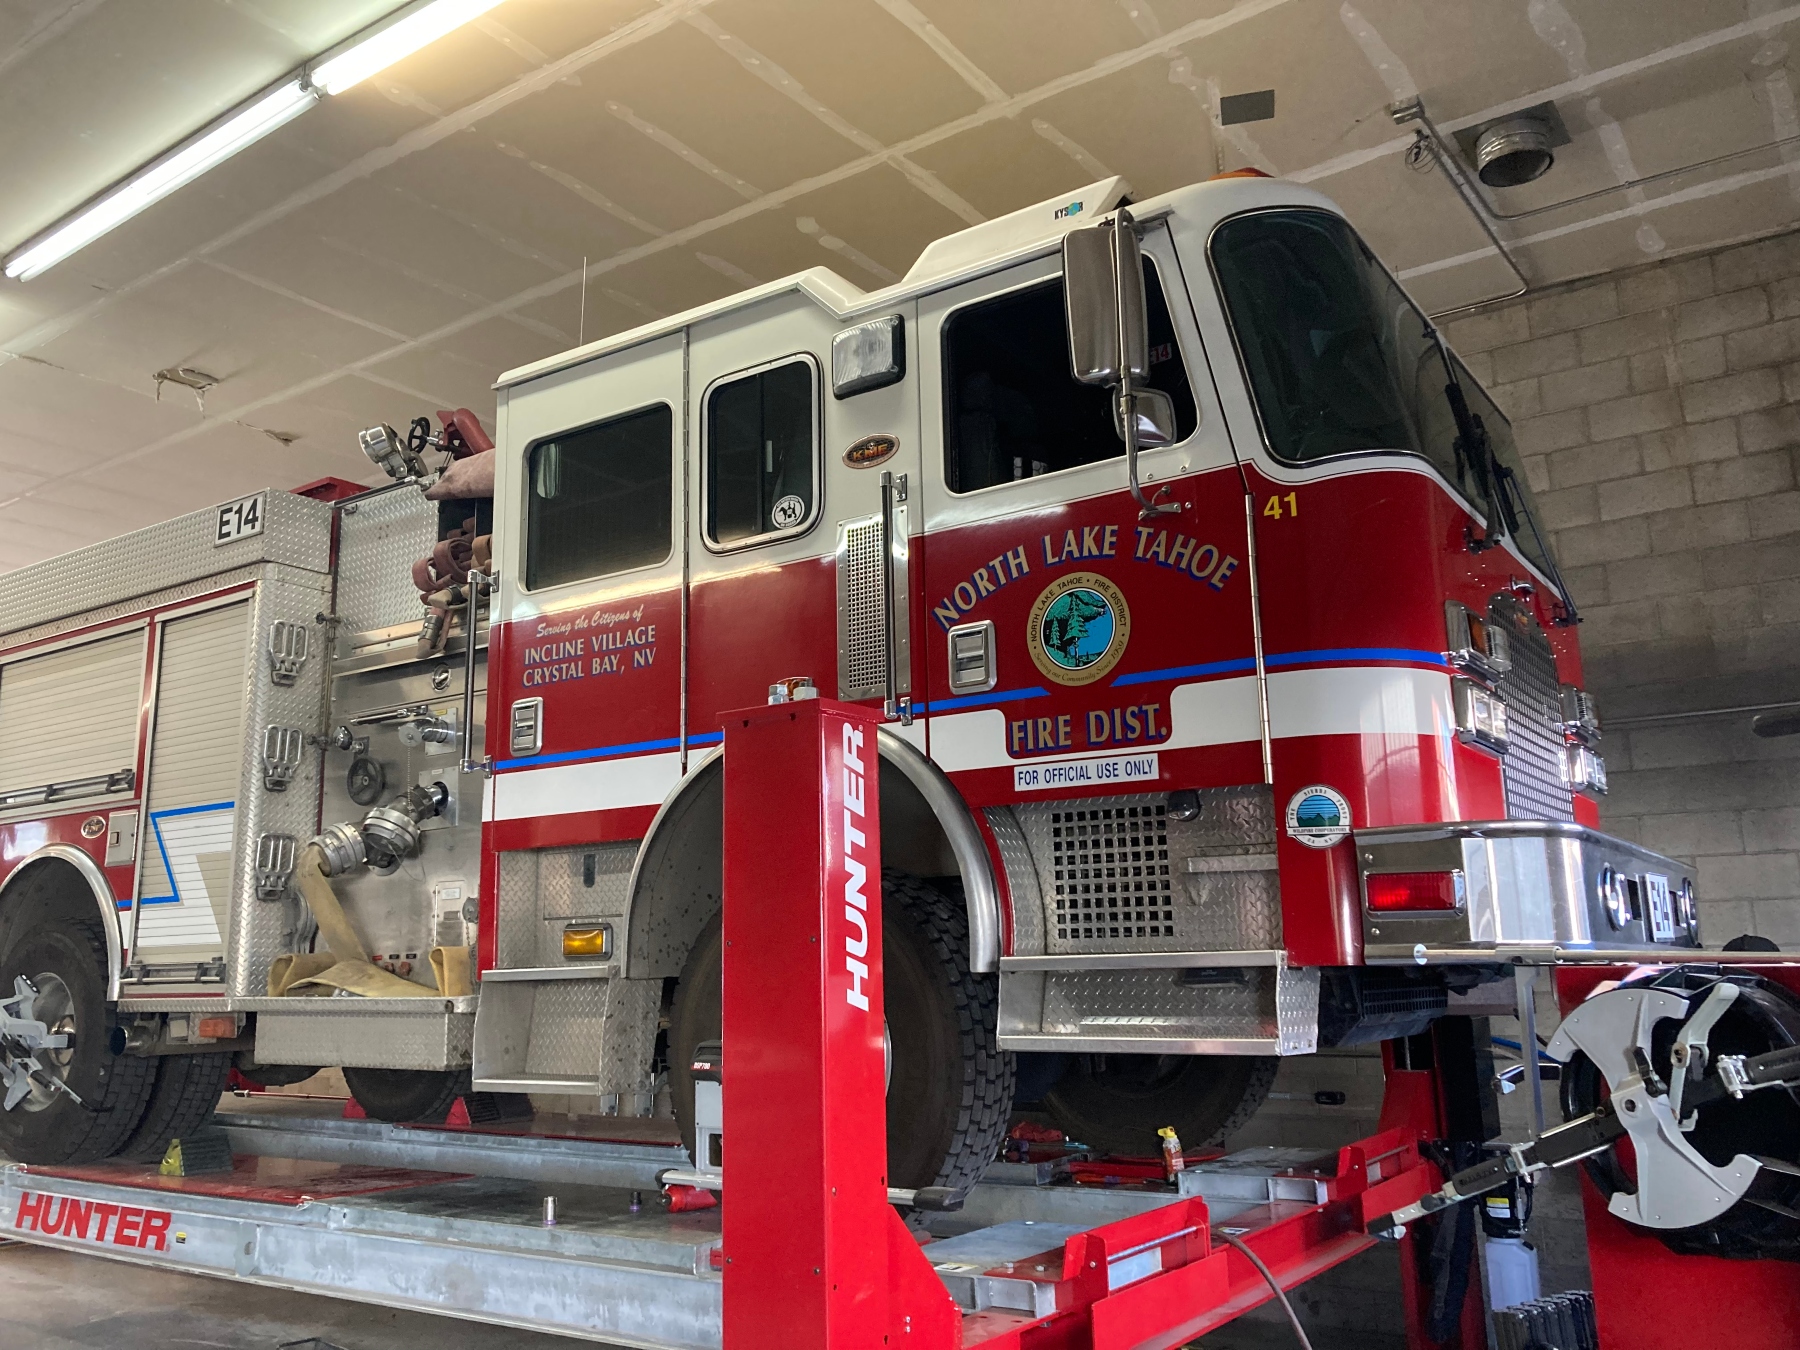 Heavy duty truck alignment performed on a North Lake Tahoe firetruck